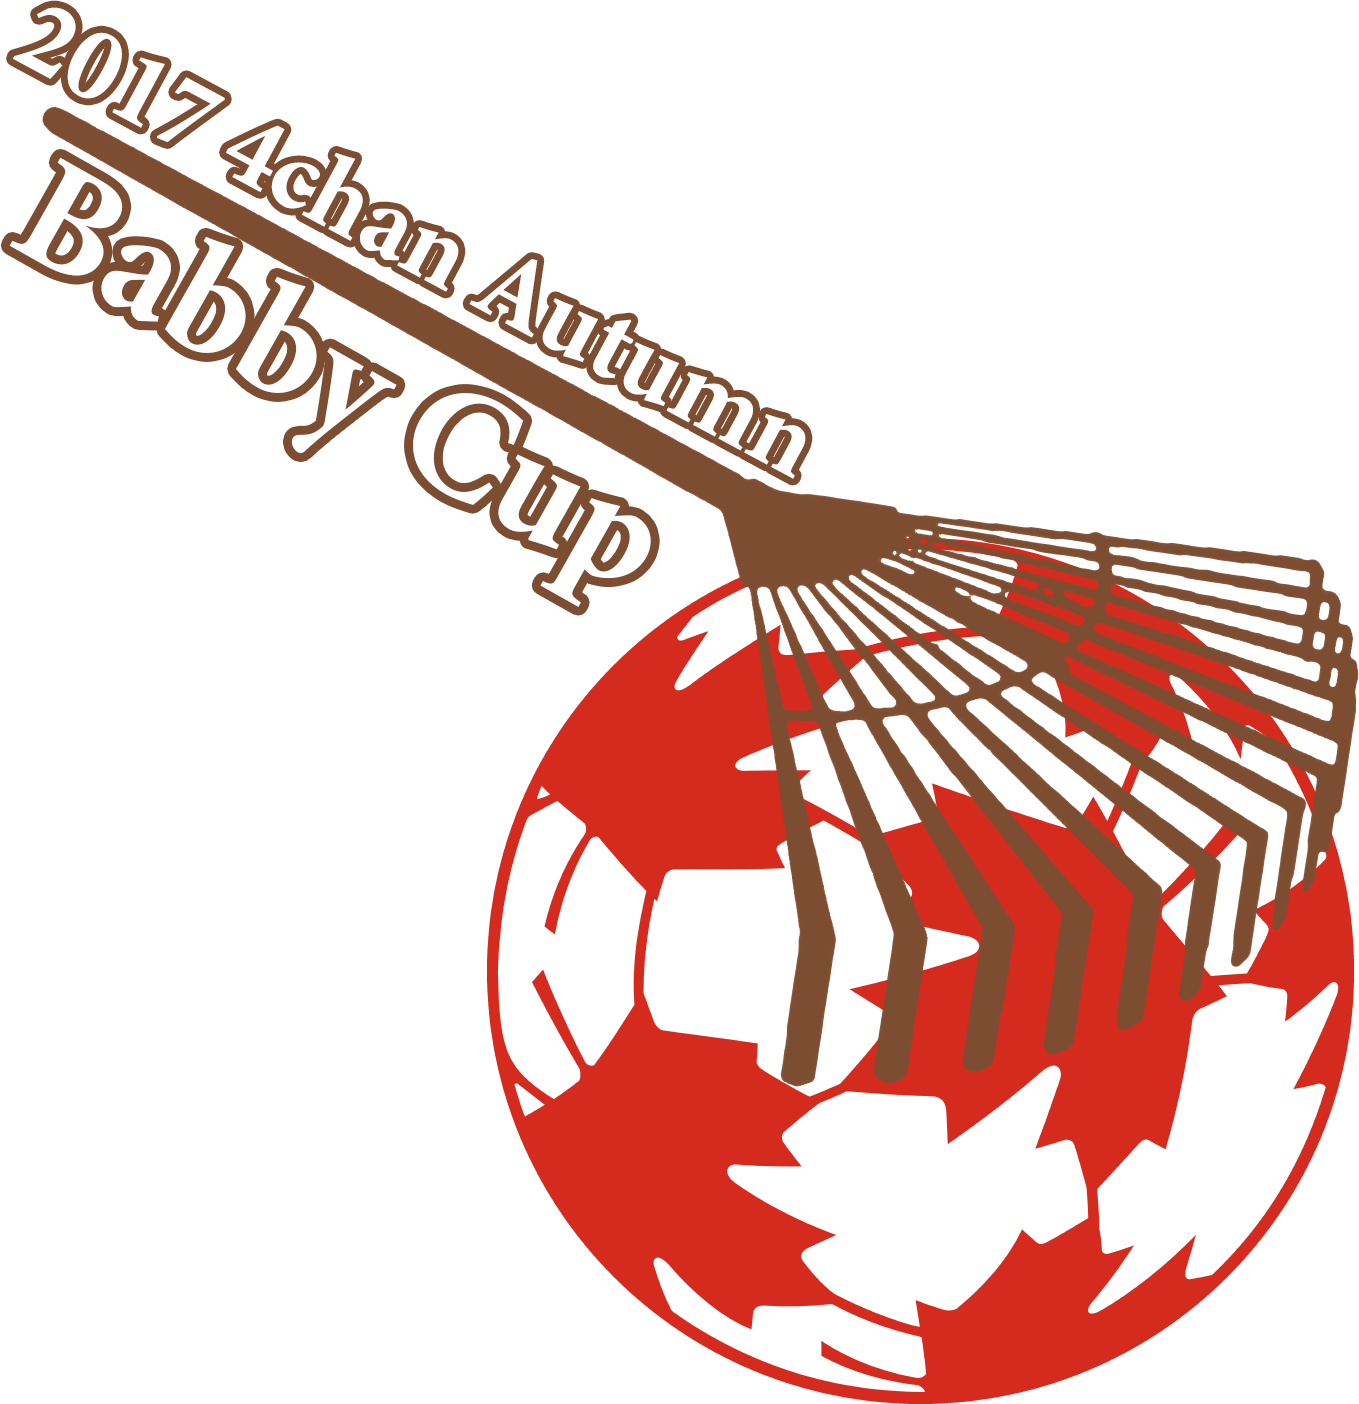 2017 4chan Autumn Babby Cup